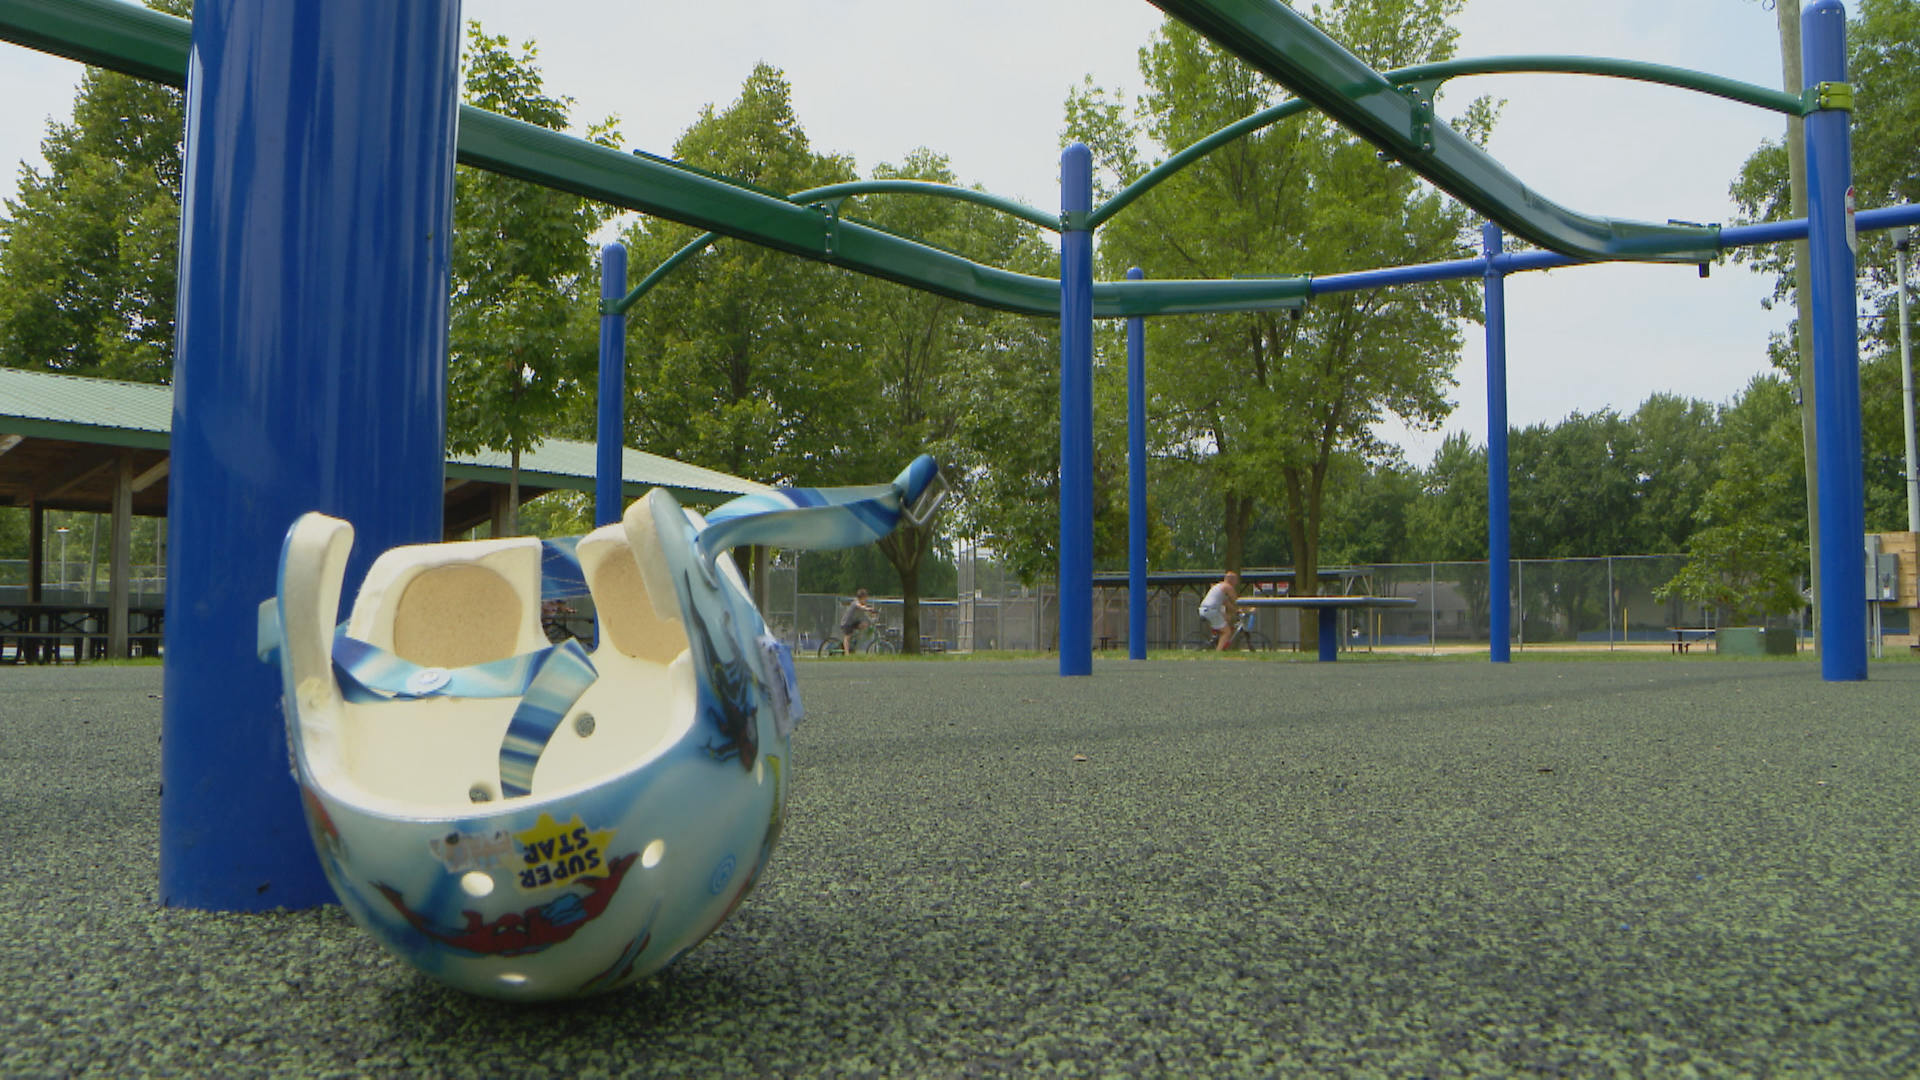 The newly opened inclusive playground in Owatonna features squishy floors and accessible equipment for all abilities.